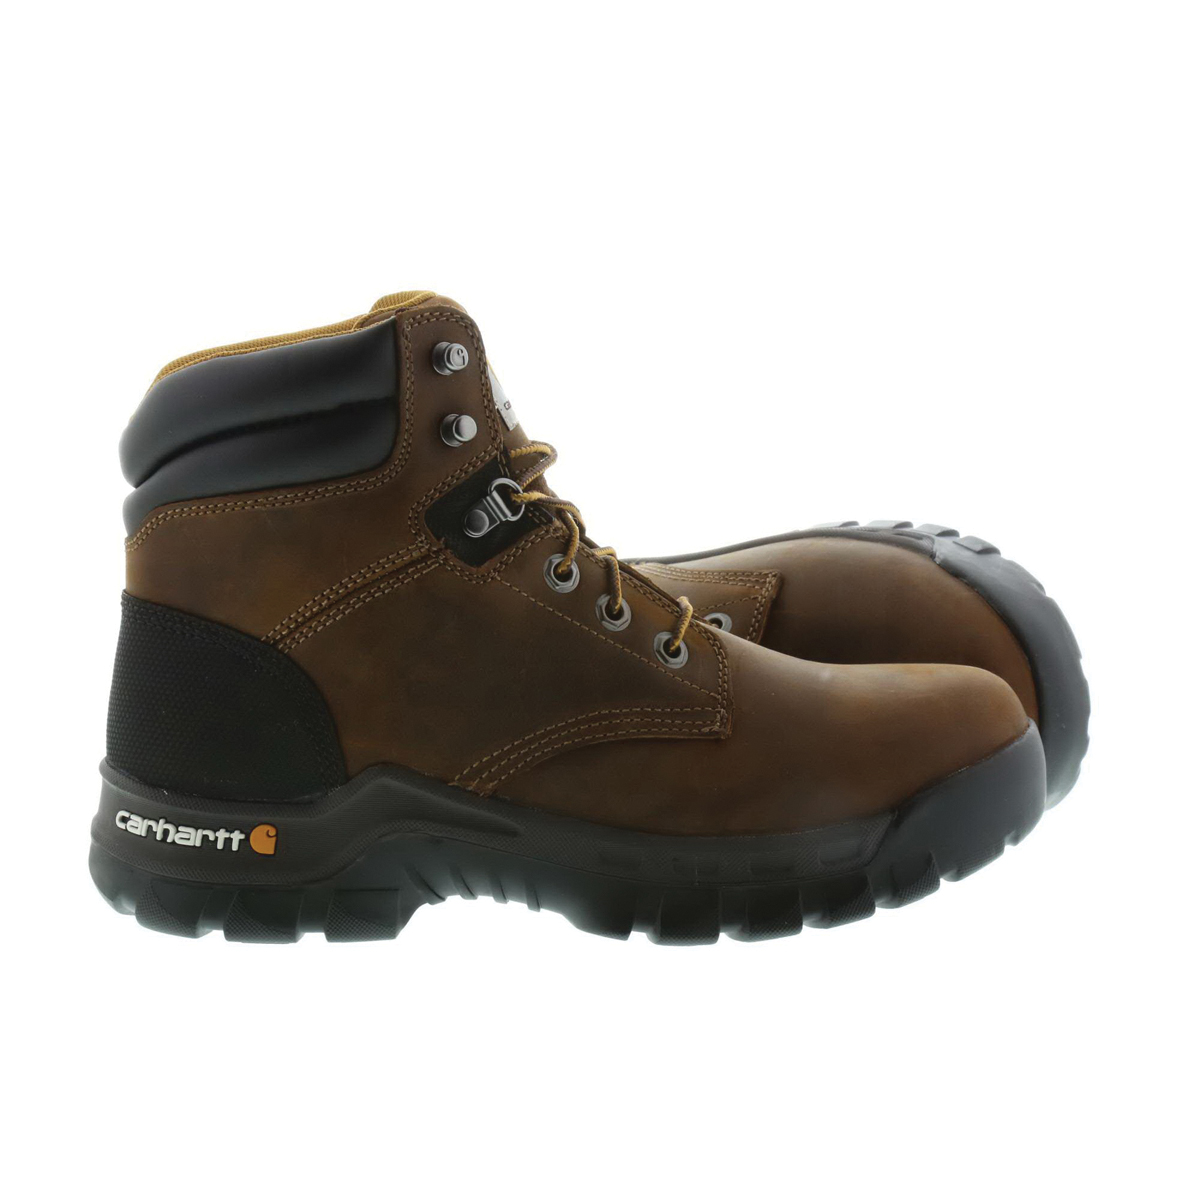 Carhartt CMF6366-BOD-11W Work Boots, 11, W, Brown Oil Tanned, Leather Upper, Lace-Up Closure - 3